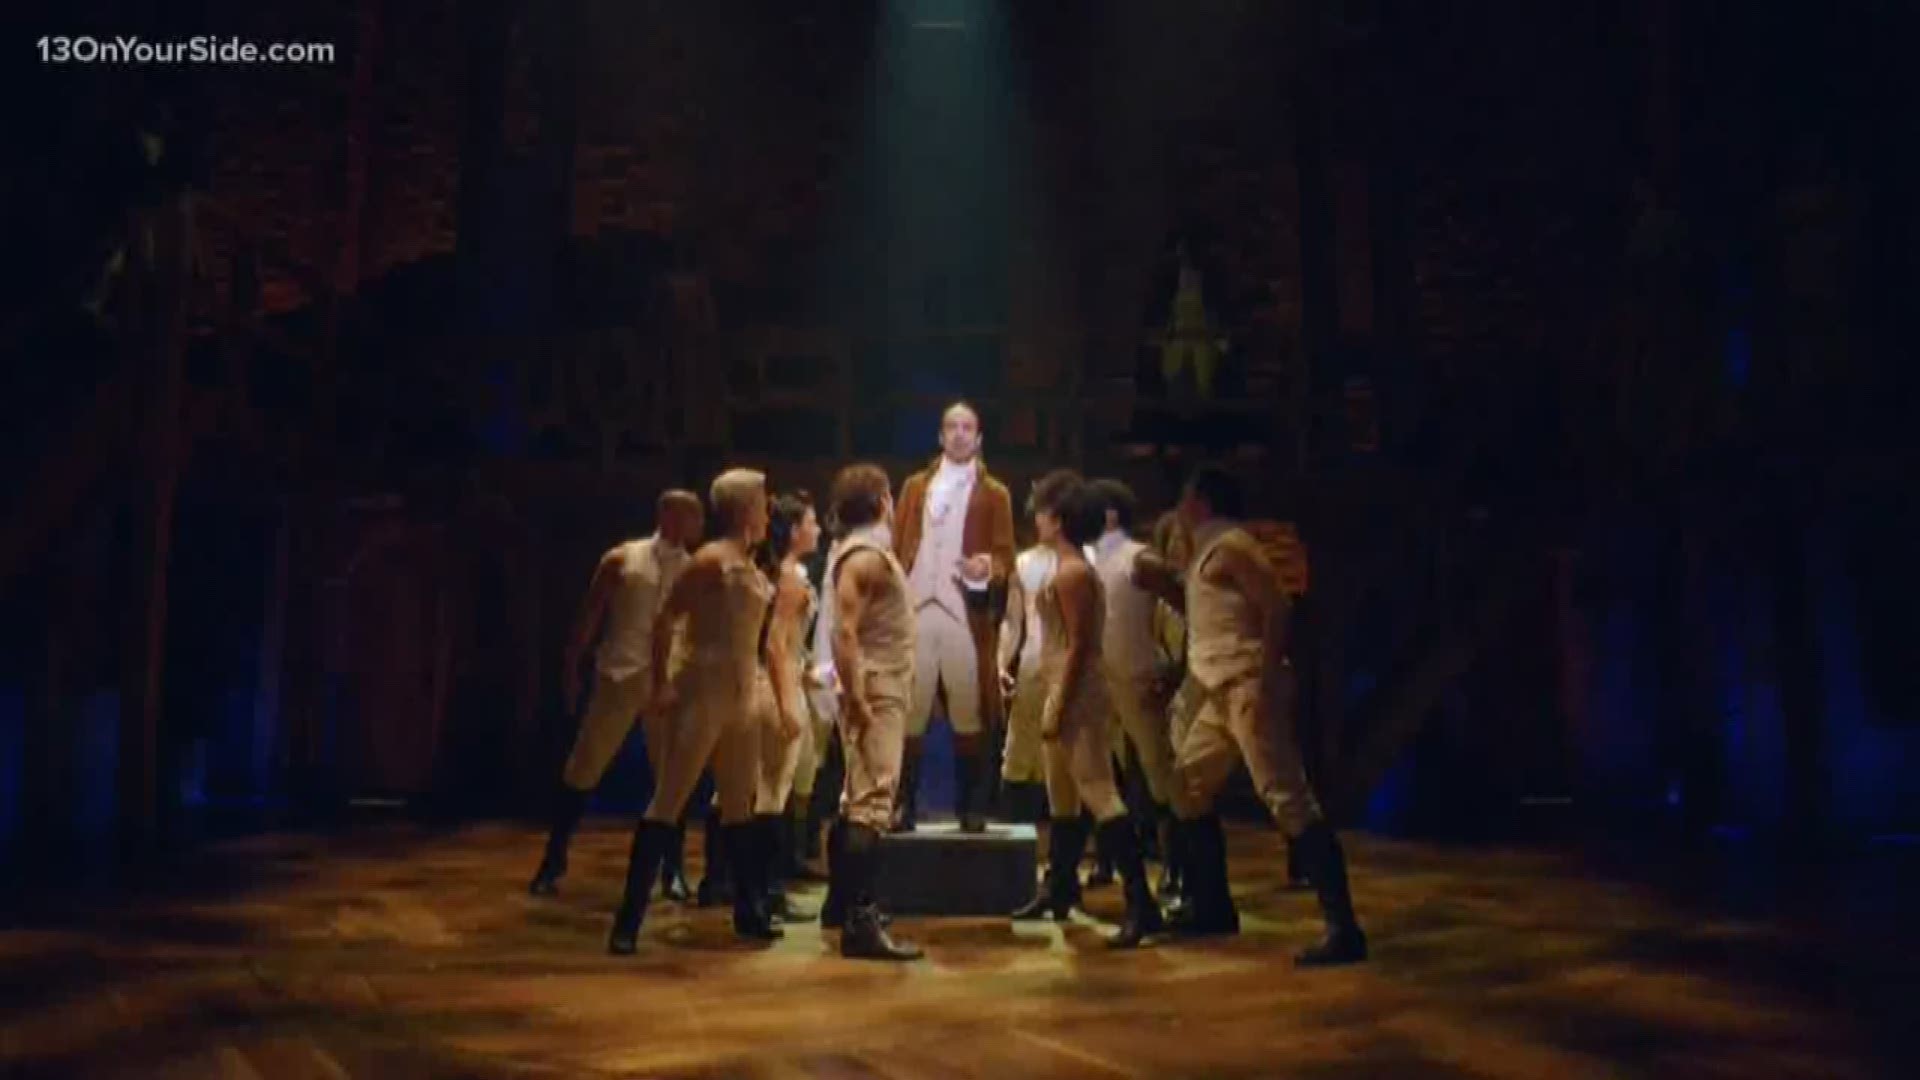 Grab your tickets to 'Hamilton' in Grand Rapids today! They go on sale Thursday morning and the shows take place early next year.